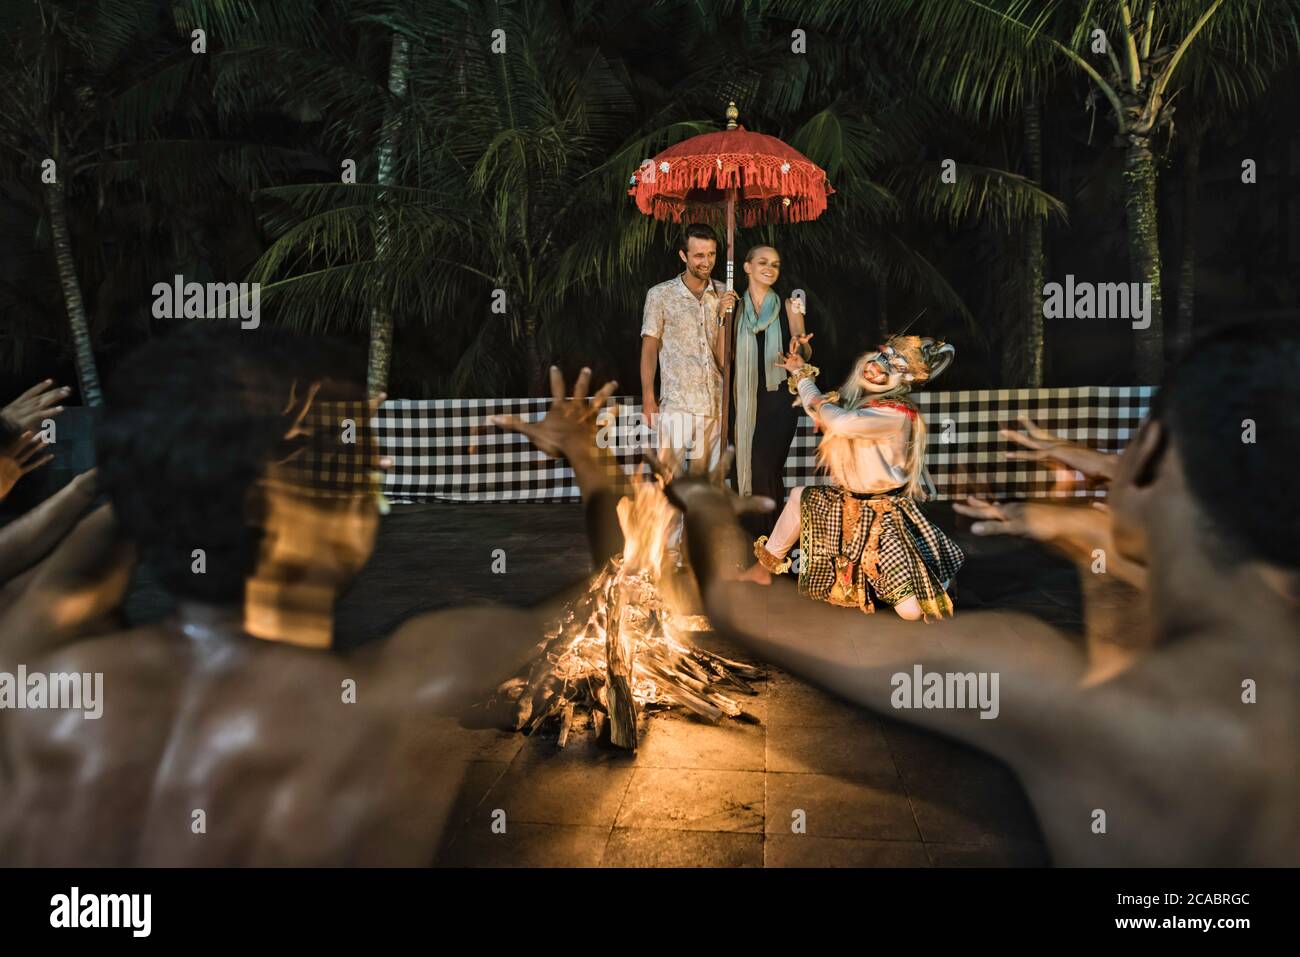 Asia, Indonesia, Bali, young Caucasian couple, wearing smart casual clothing, enjoying a traditional Balinese Kecak dance performed around a fire, at Stock Photo